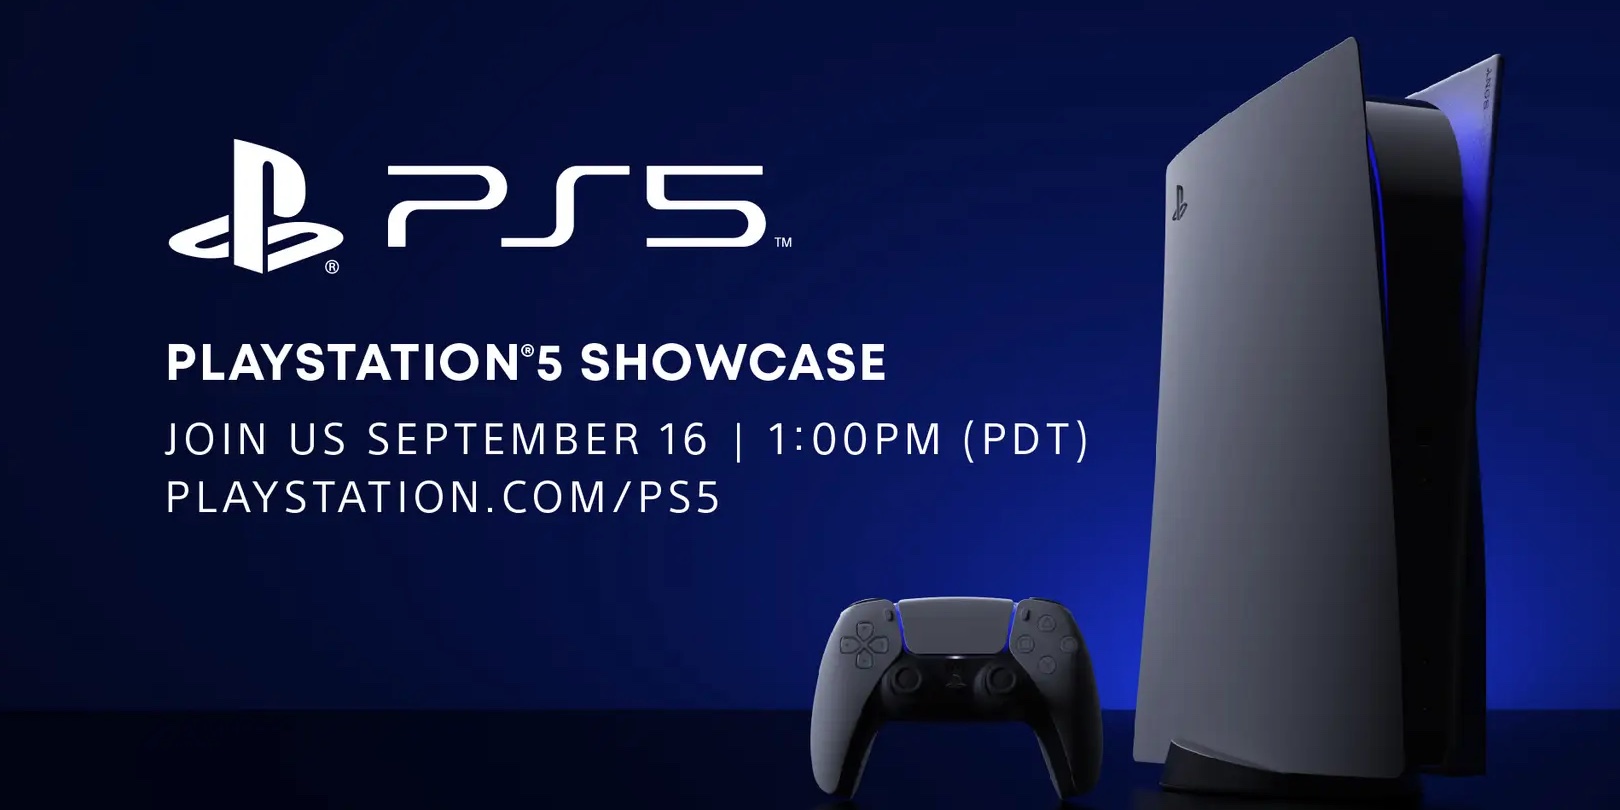 PlayStation 5 release date, price, more in today's showcase -